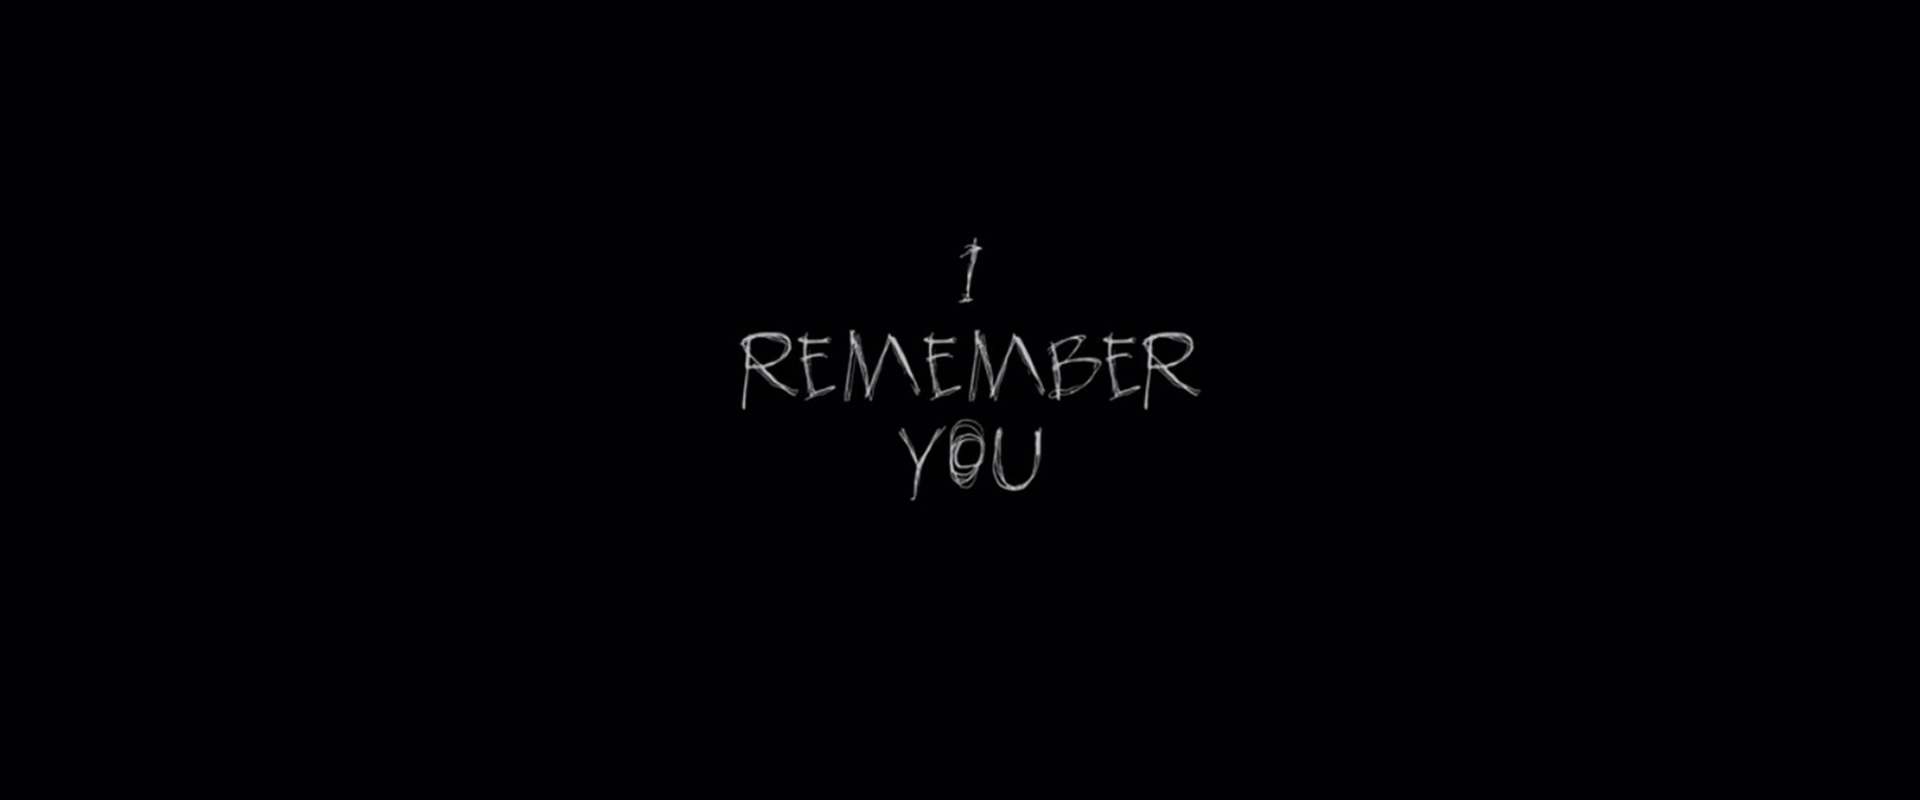 I Remember You background 2